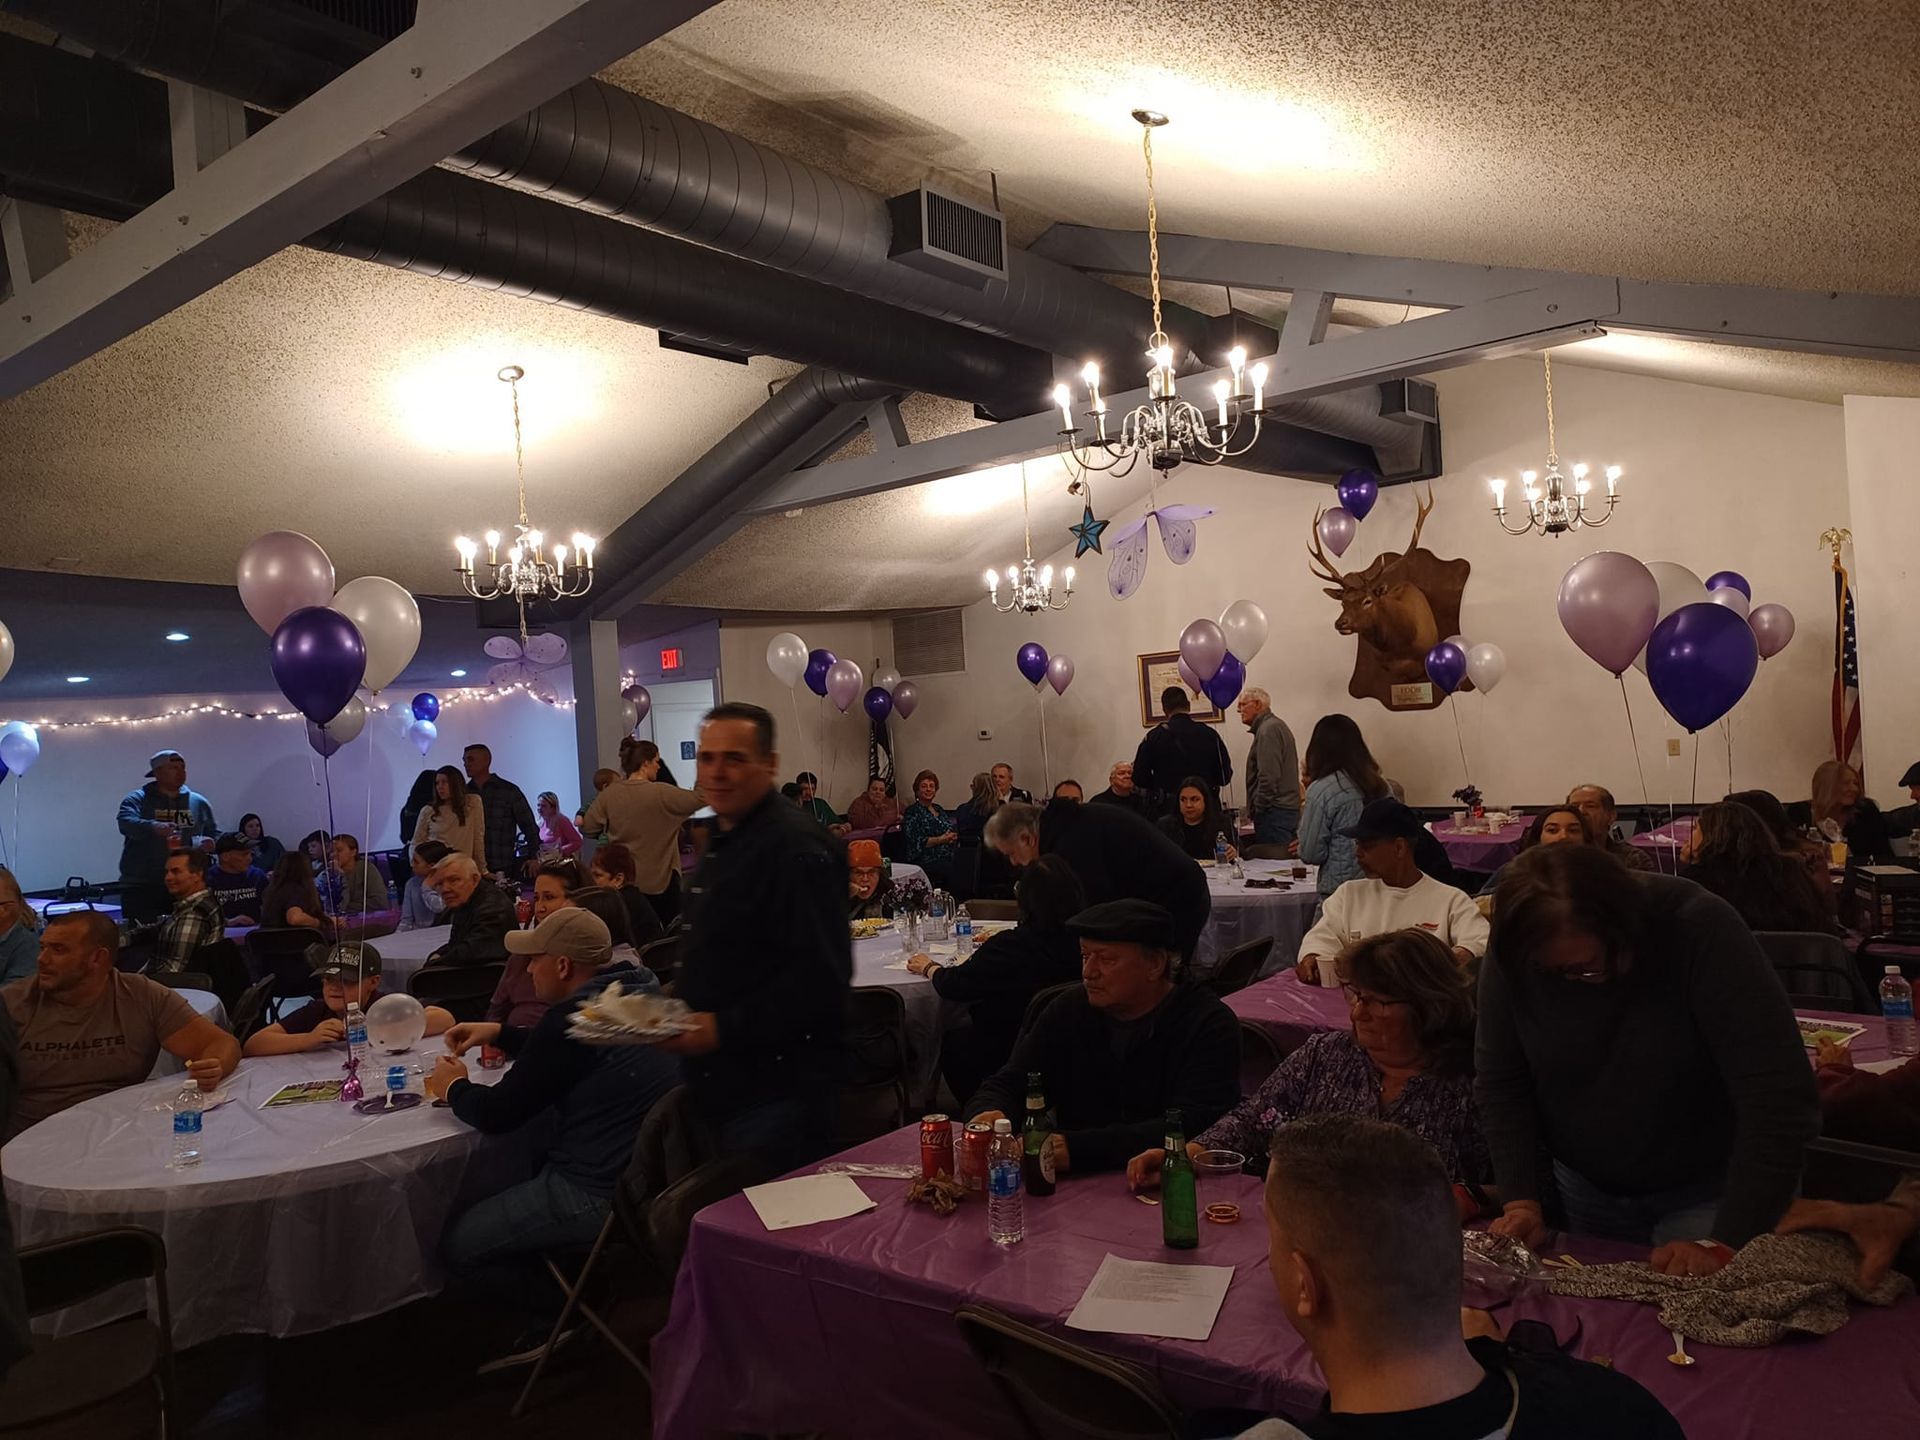 a large group of people are sitting at tables in a room decorated with purple balloons